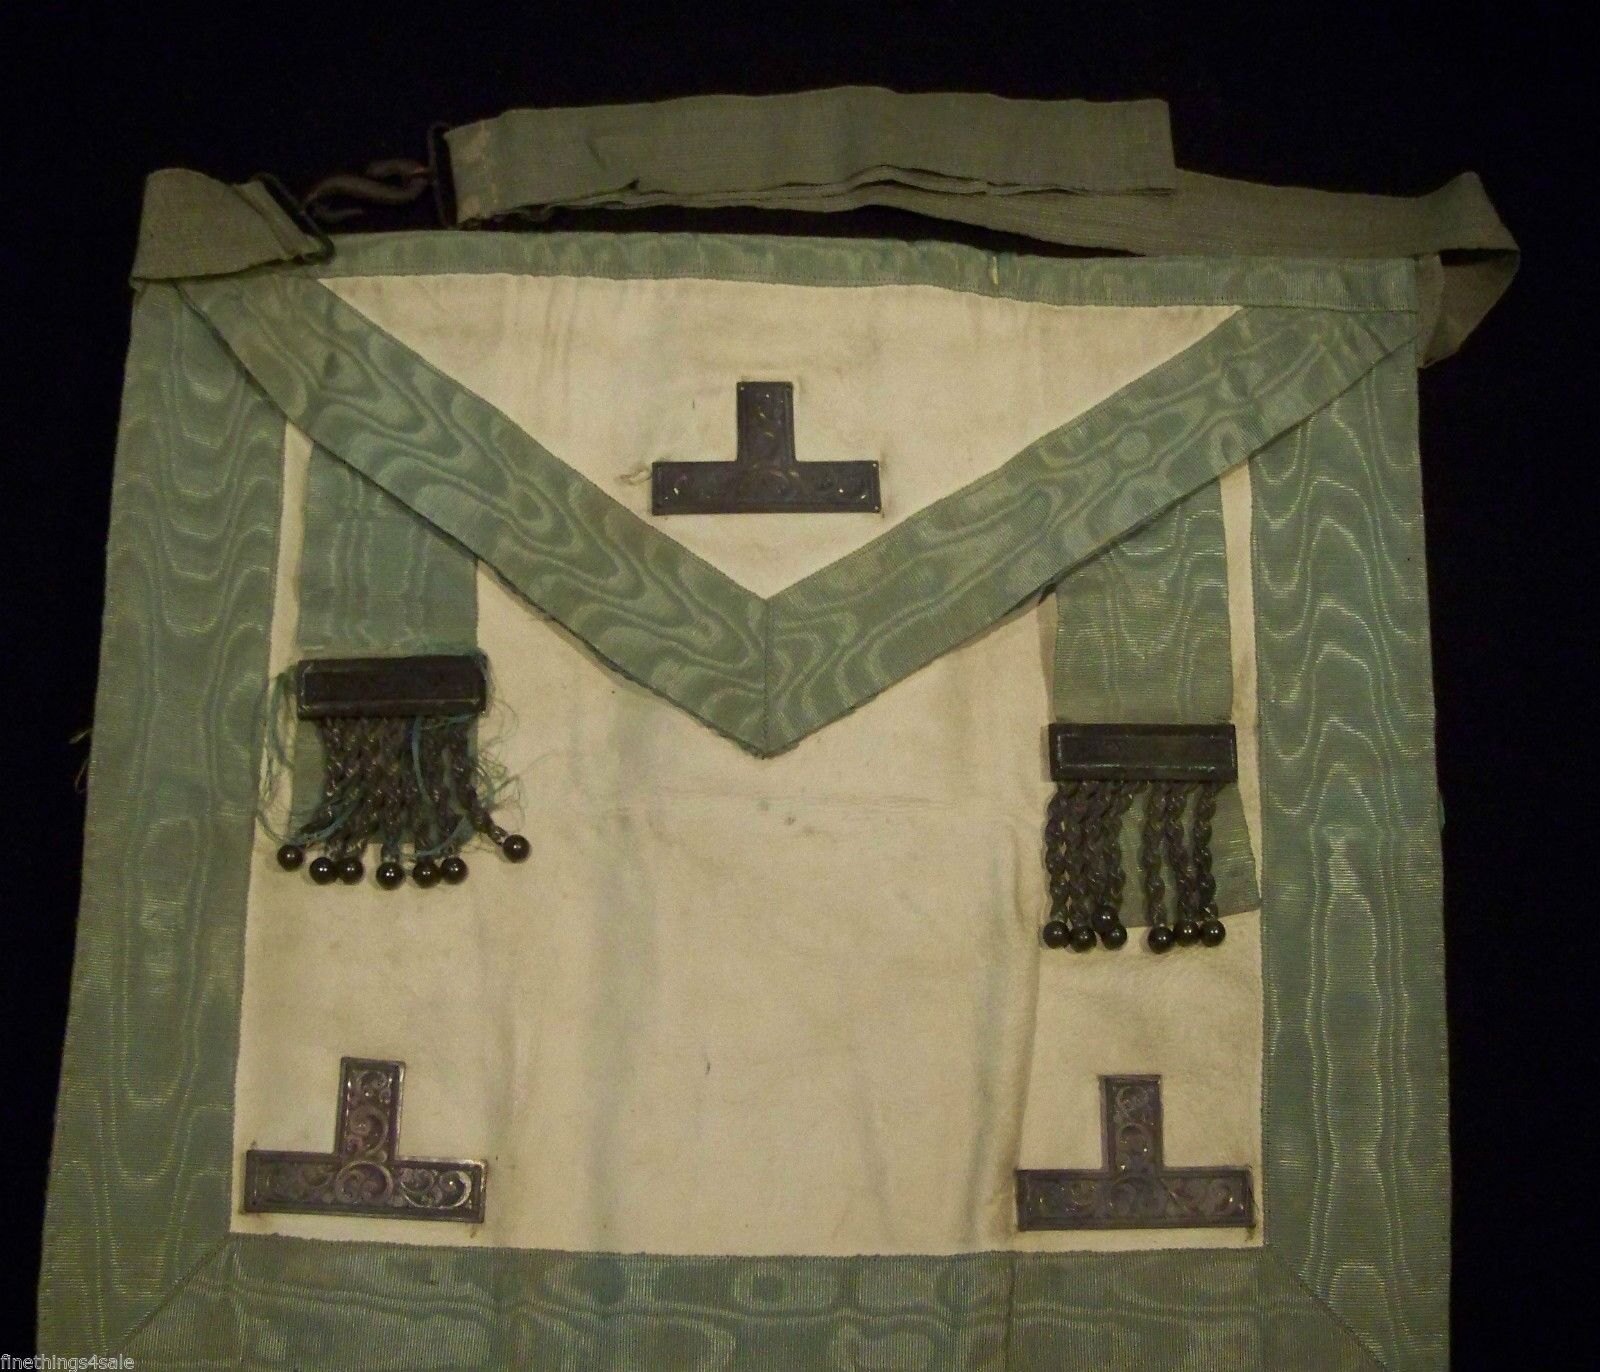 ANTIQUE CIRCA 1800's MASONIC APRON  - TO FRAME? GOAT SKIN SILK CHASED STERLING 